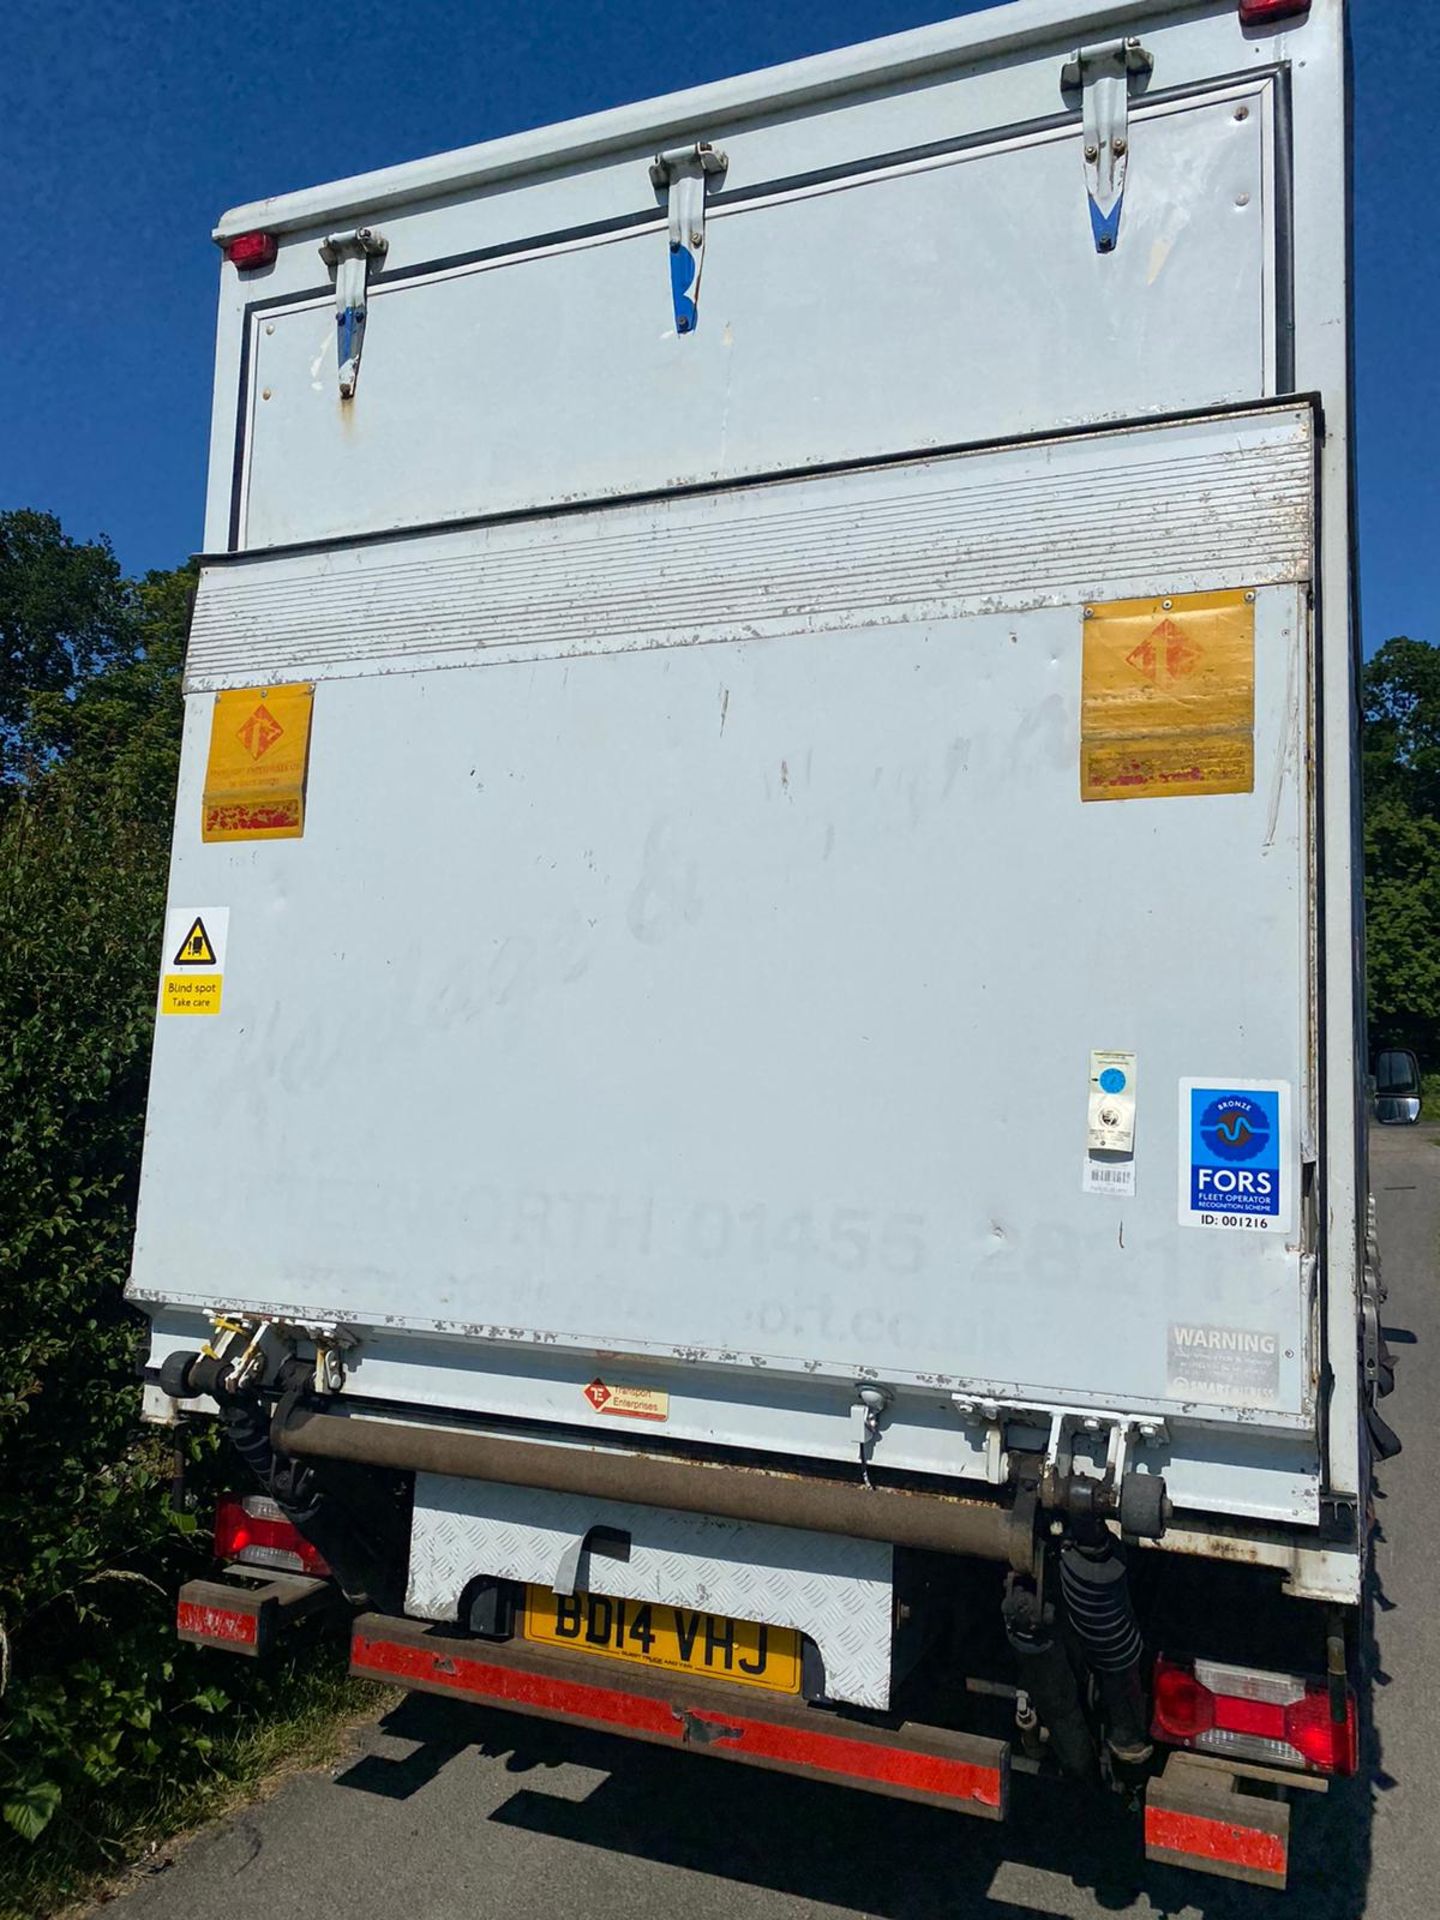 2014 IVECO 70C 17 CURTAINSIDER TRUCK .LOCATION NORTH YORKSHIRE. - Image 4 of 6